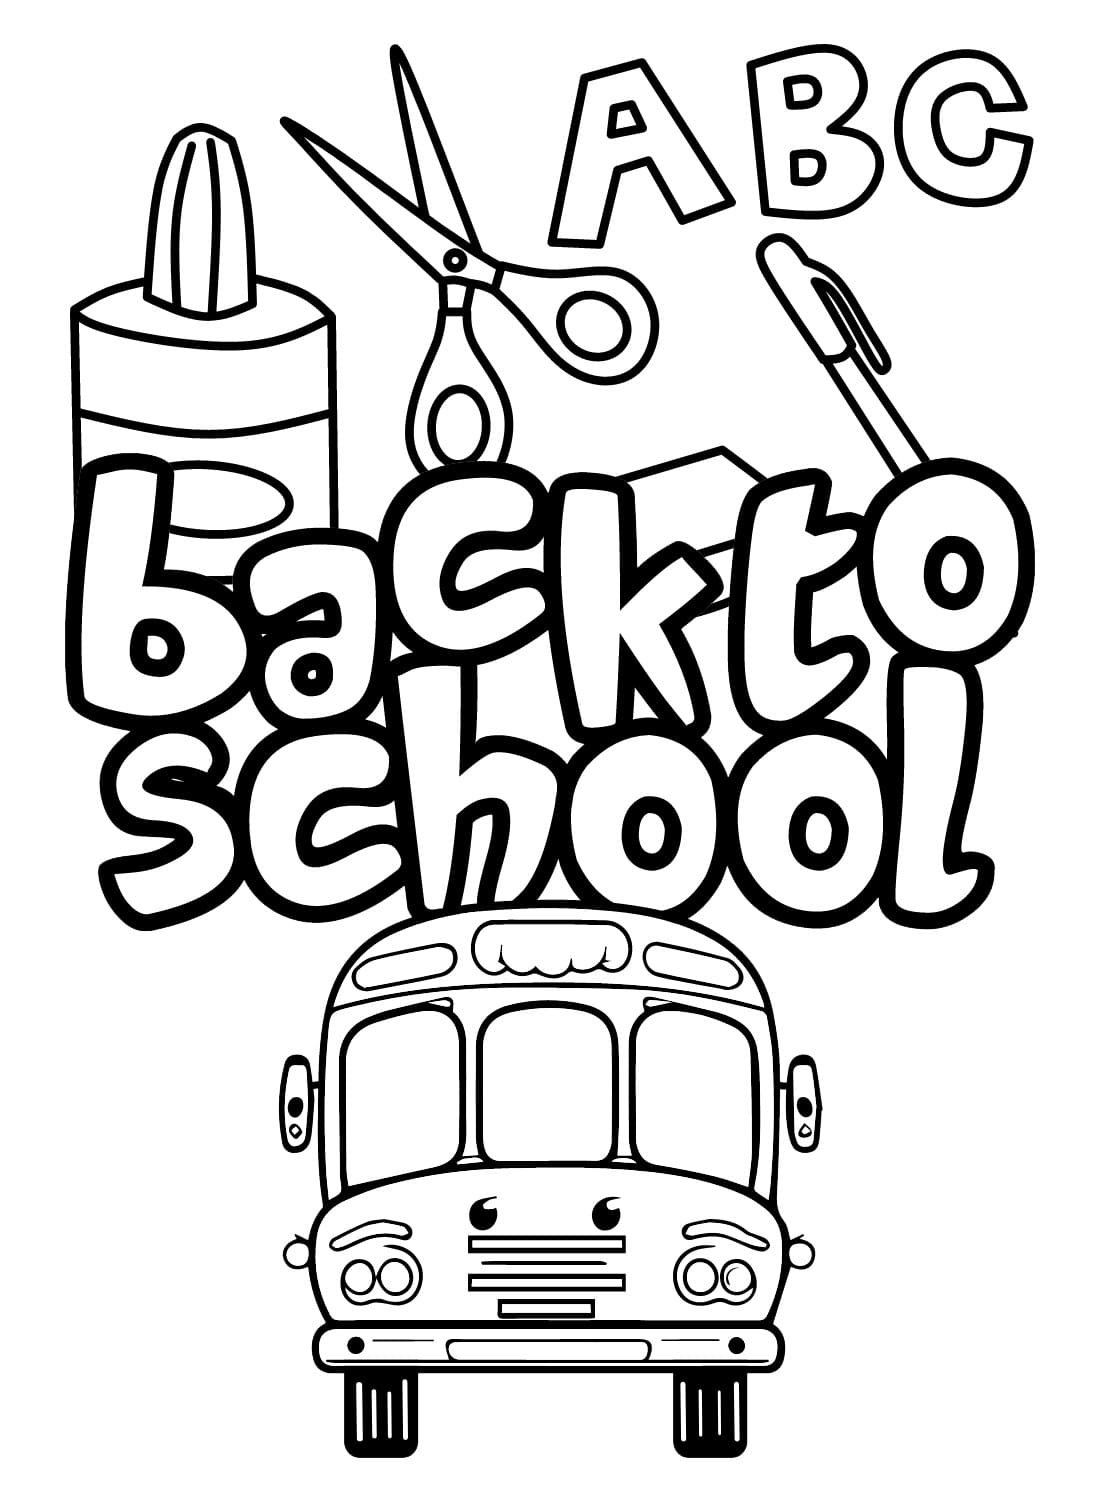 Back to School Free Image coloring page - Download, Print or Color ...